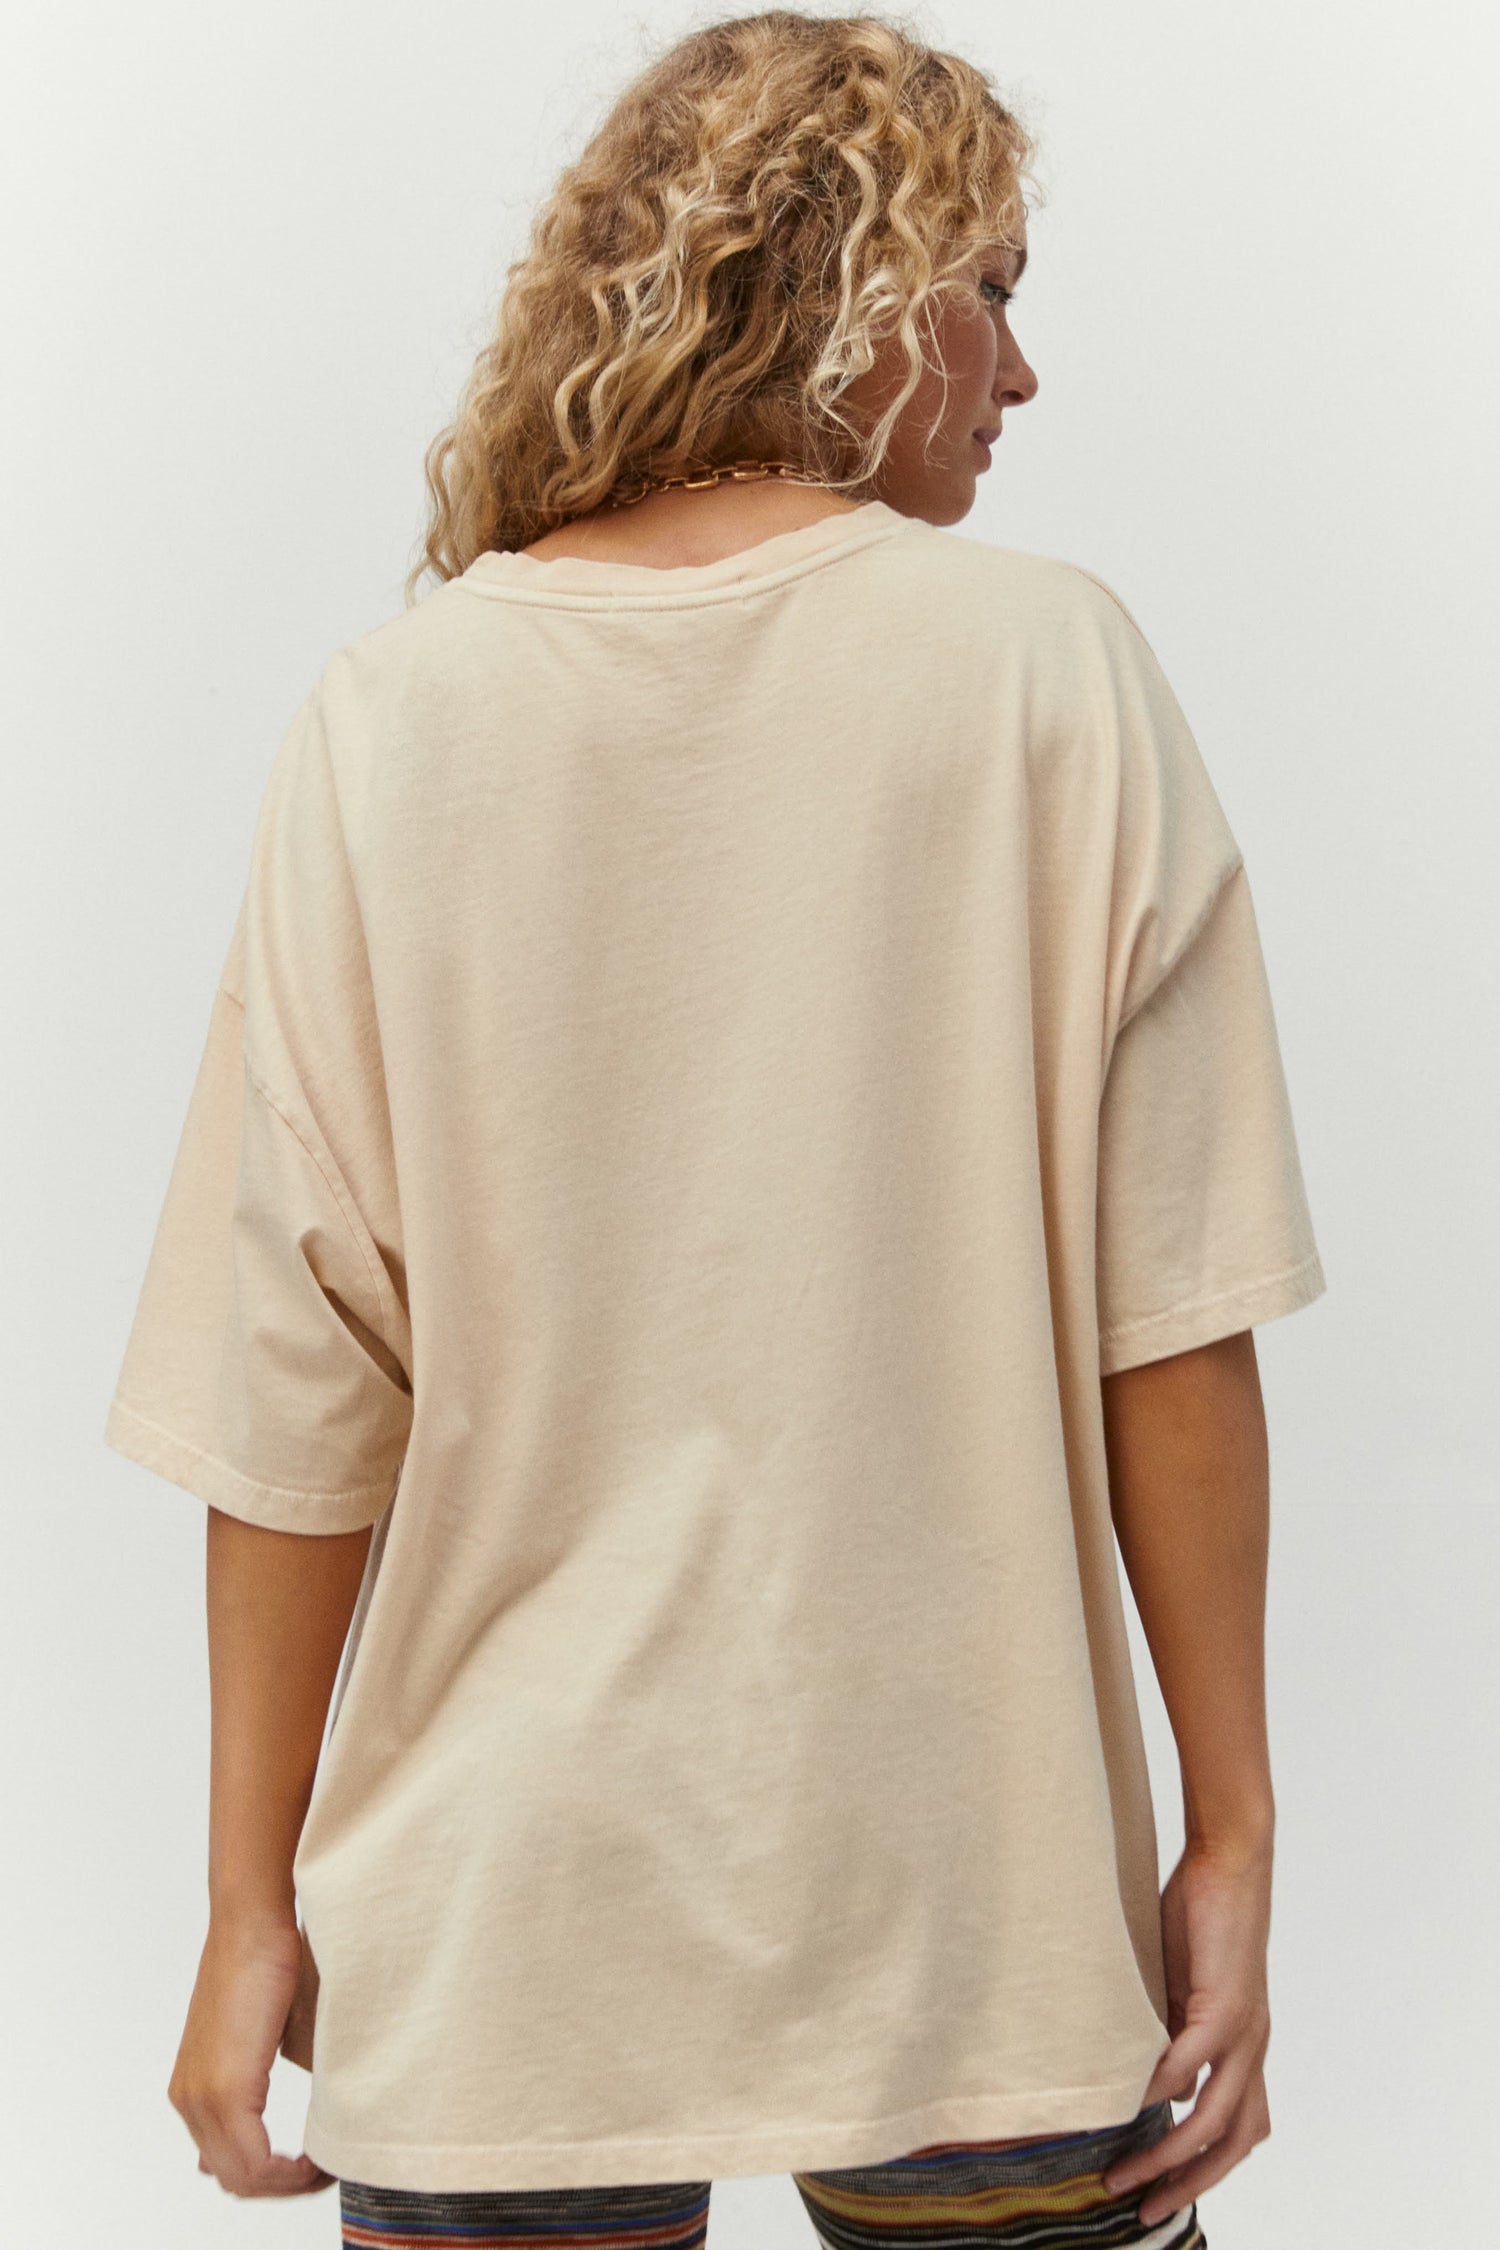 sand colored oversized shirt